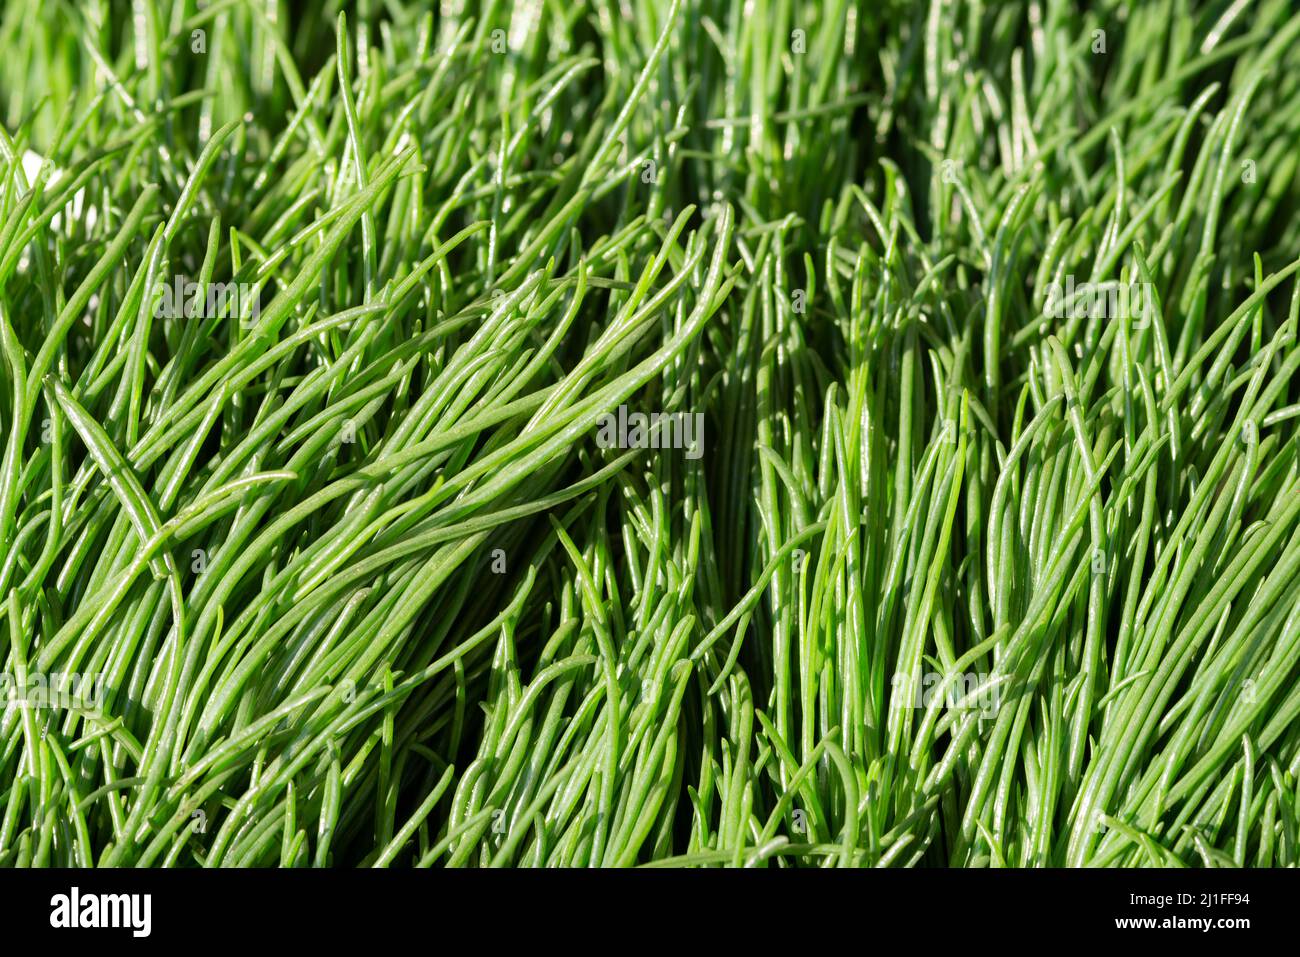 Saltwort or Friar's Beard Vegetable, Also Known as Agretti Stock Photo